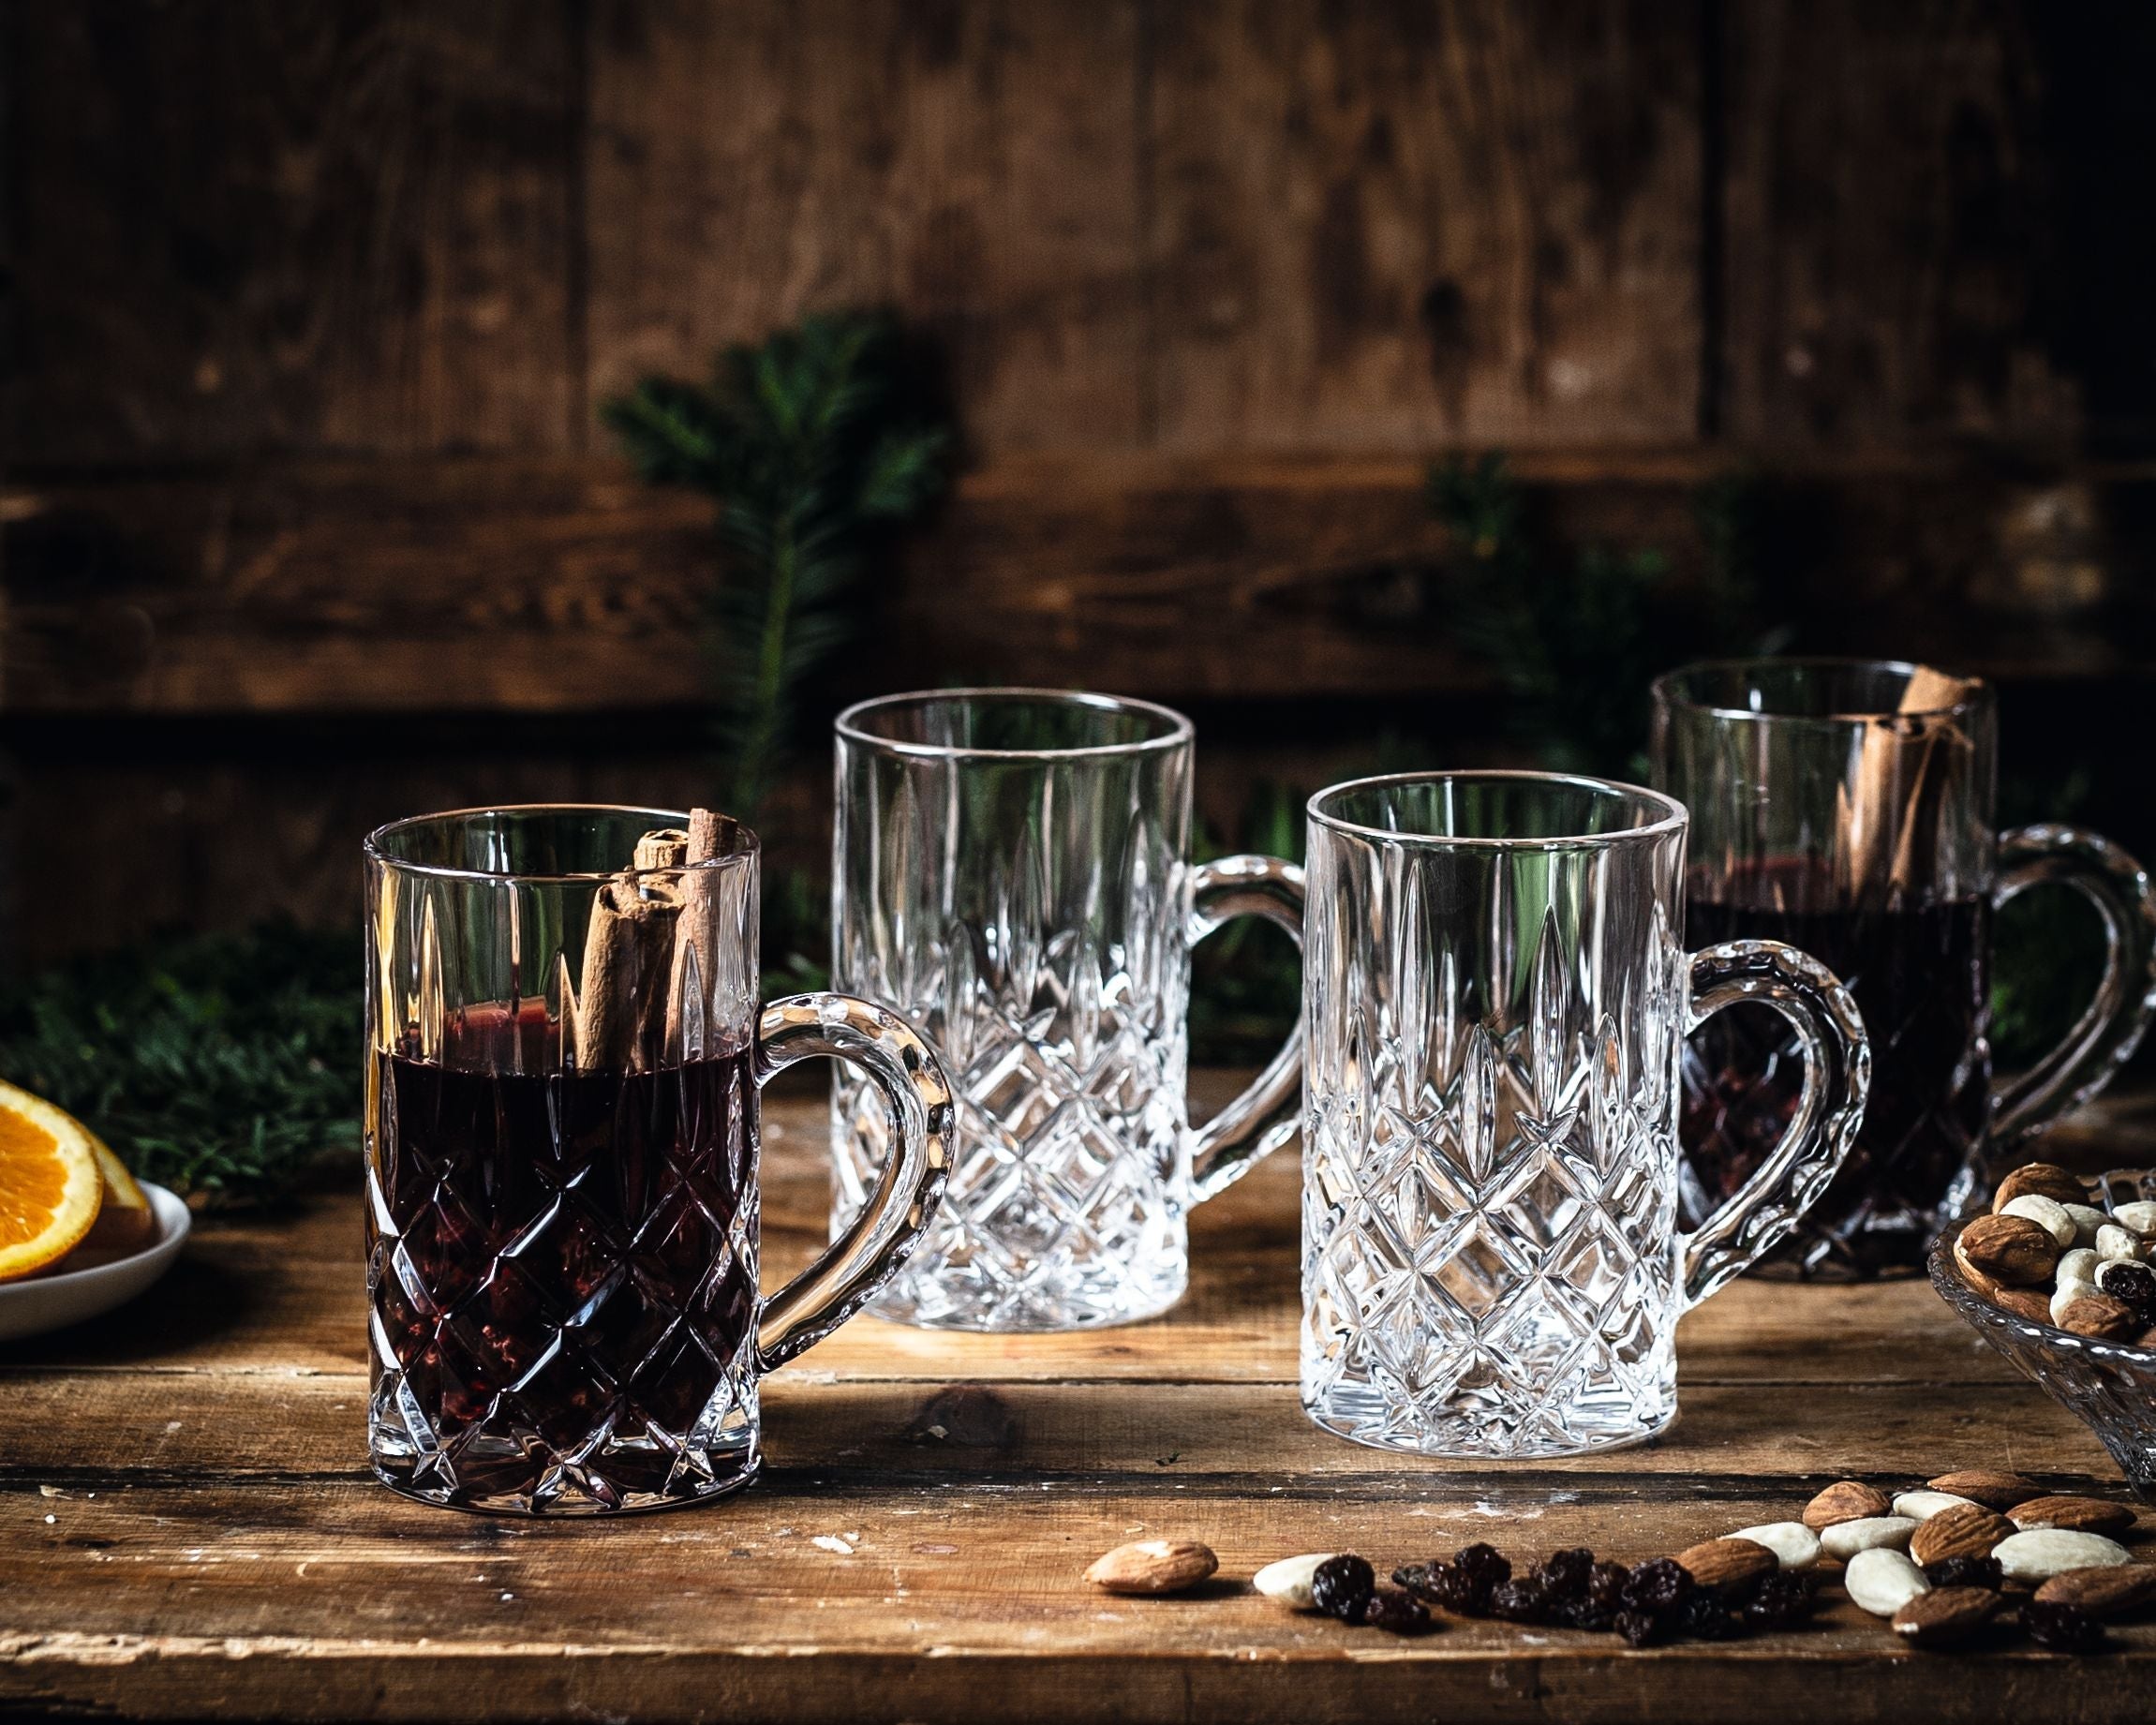 Nachtmann Noblesse Glass For Hot Drinks, Set Of 2